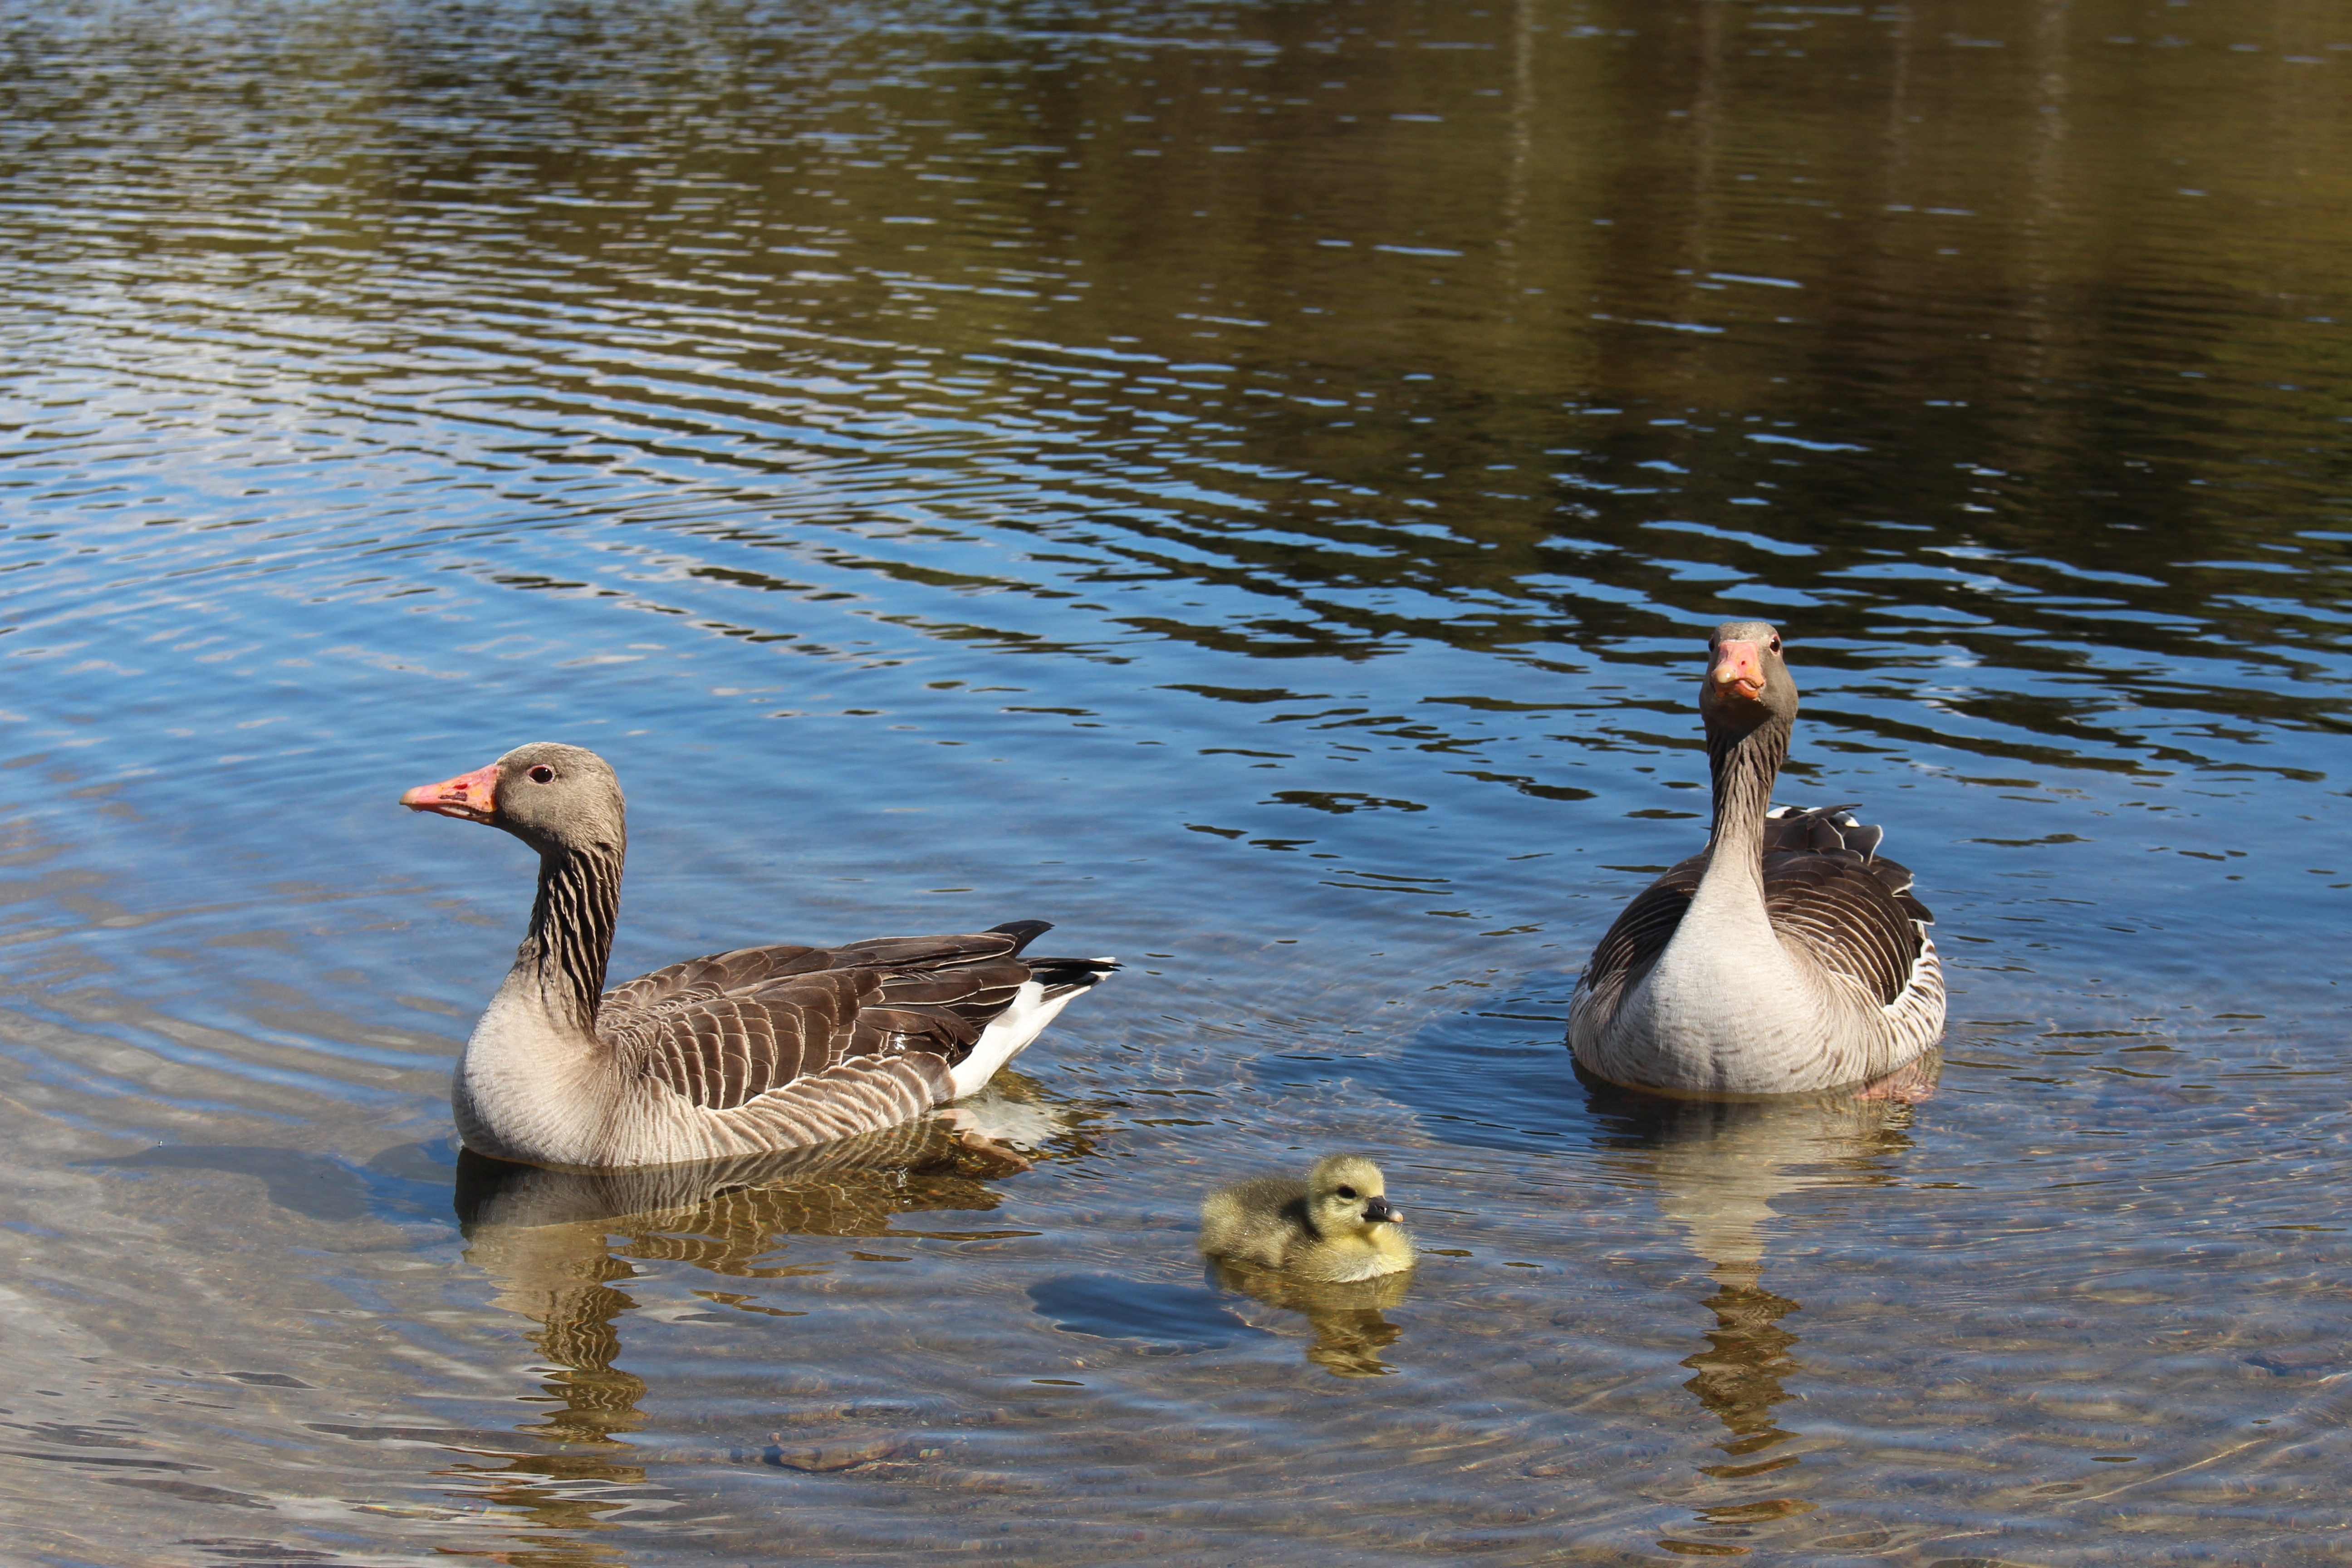 2 black-and-grey ducks and duckling on water